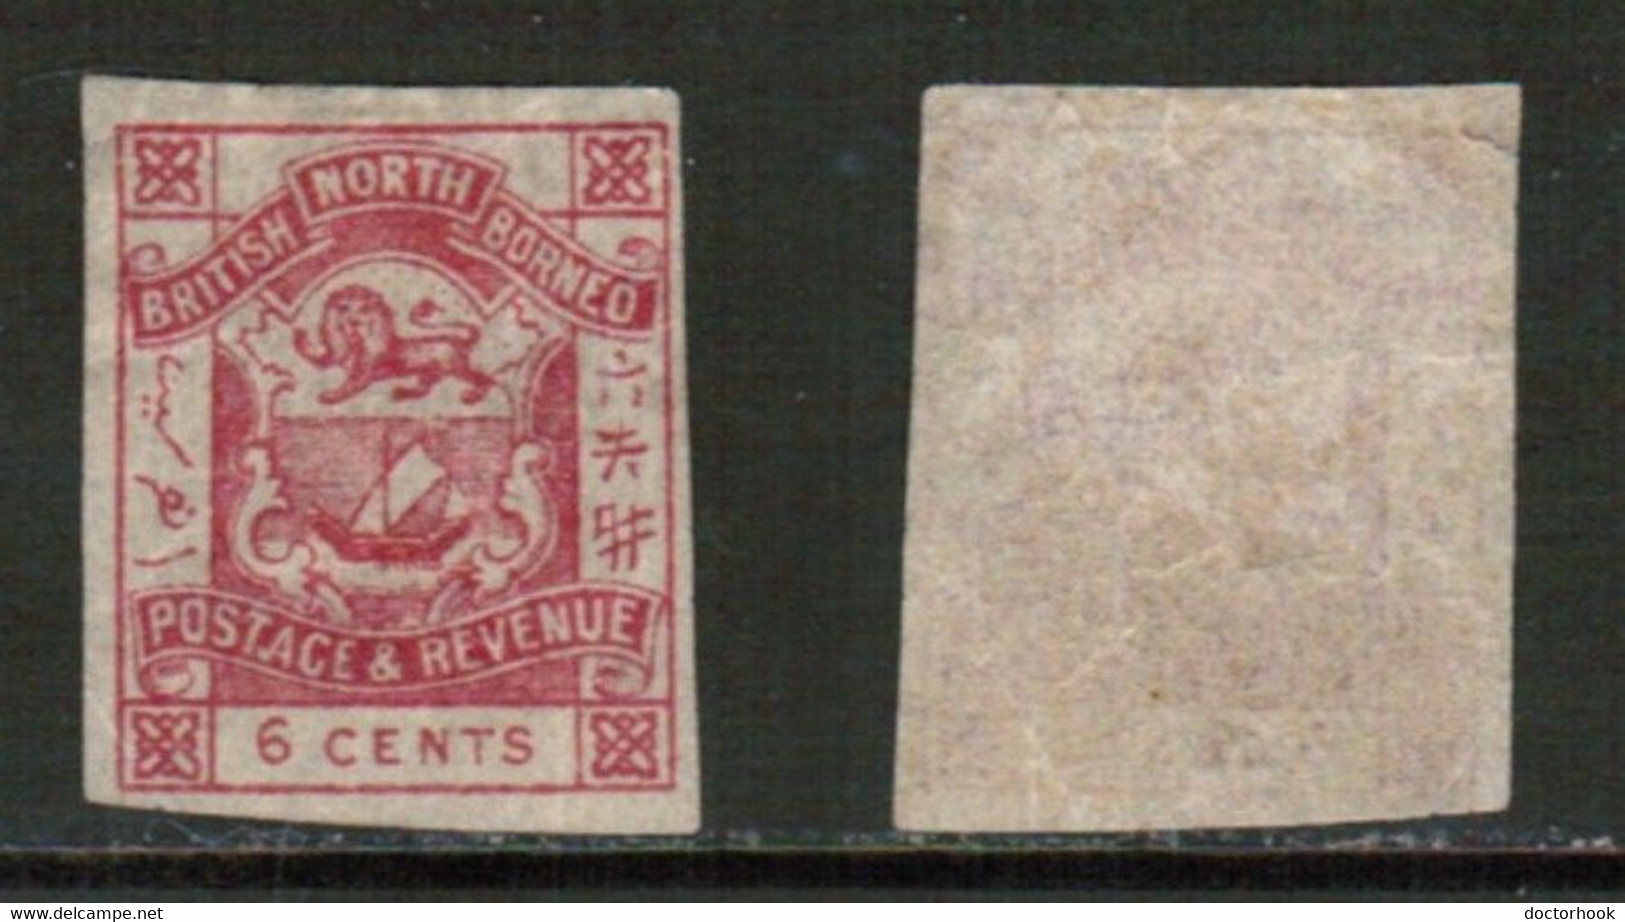 NORTH BORNEO   Scott # 41* MINT HINGED IMPERFORATE Small Fault (CONDITION AS PER SCAN) (WW-2-7) - North Borneo (...-1963)